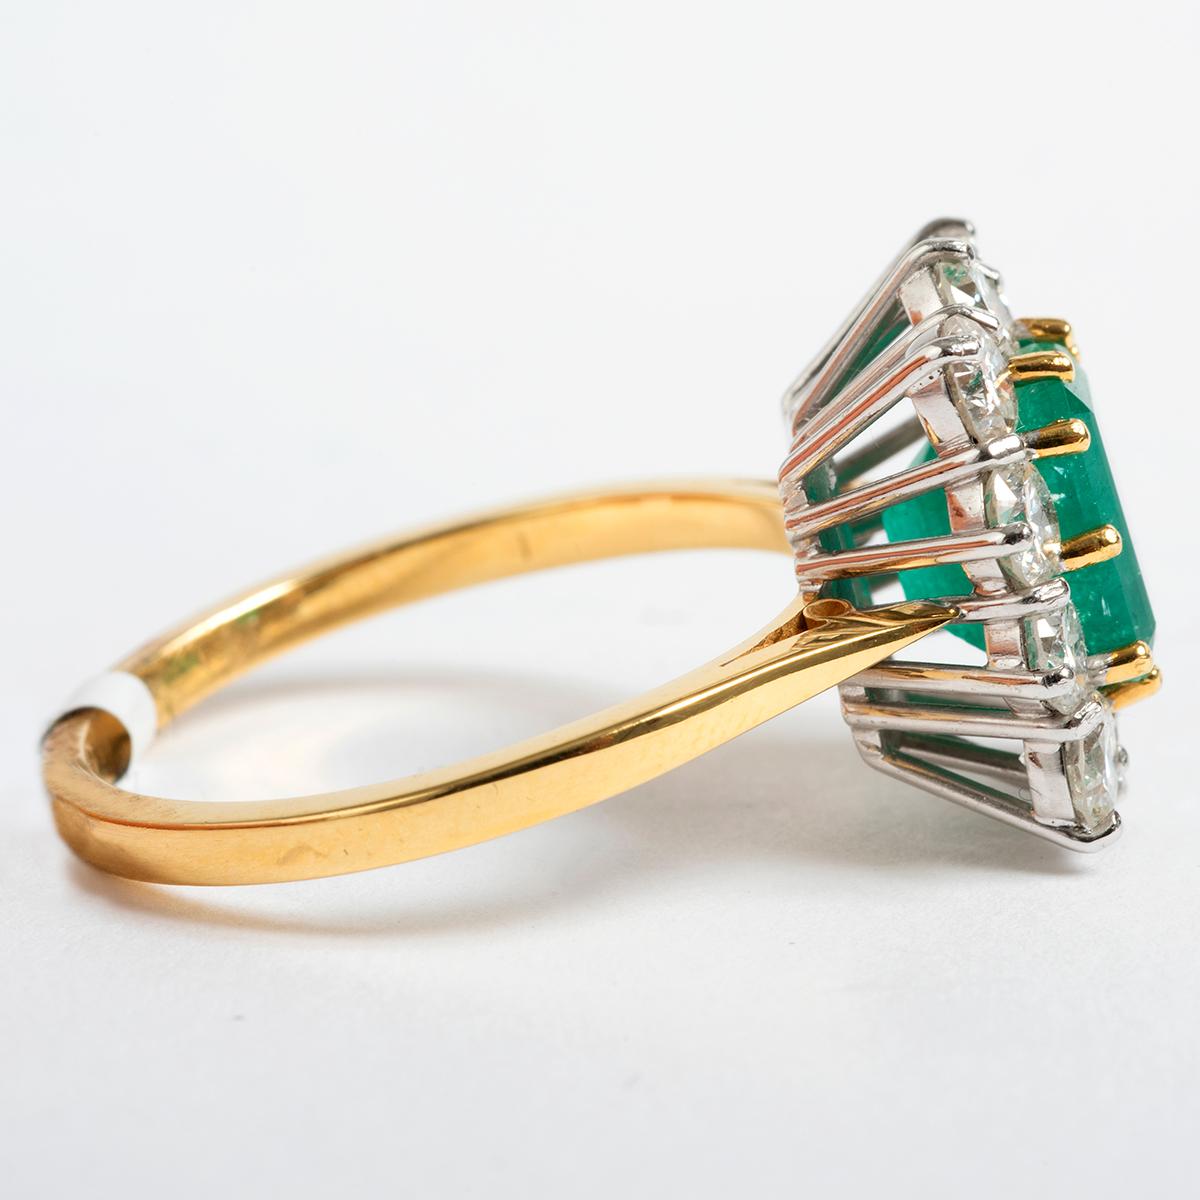 This classically designed ring from the 1960's showcases a generous emerald with surrounding diamonds. This ring is set in 18k Yellow Gold. Diamonds set in est 1.61ct and emerald est 1.97ct in weight. A true statement piece this ring comes in UK